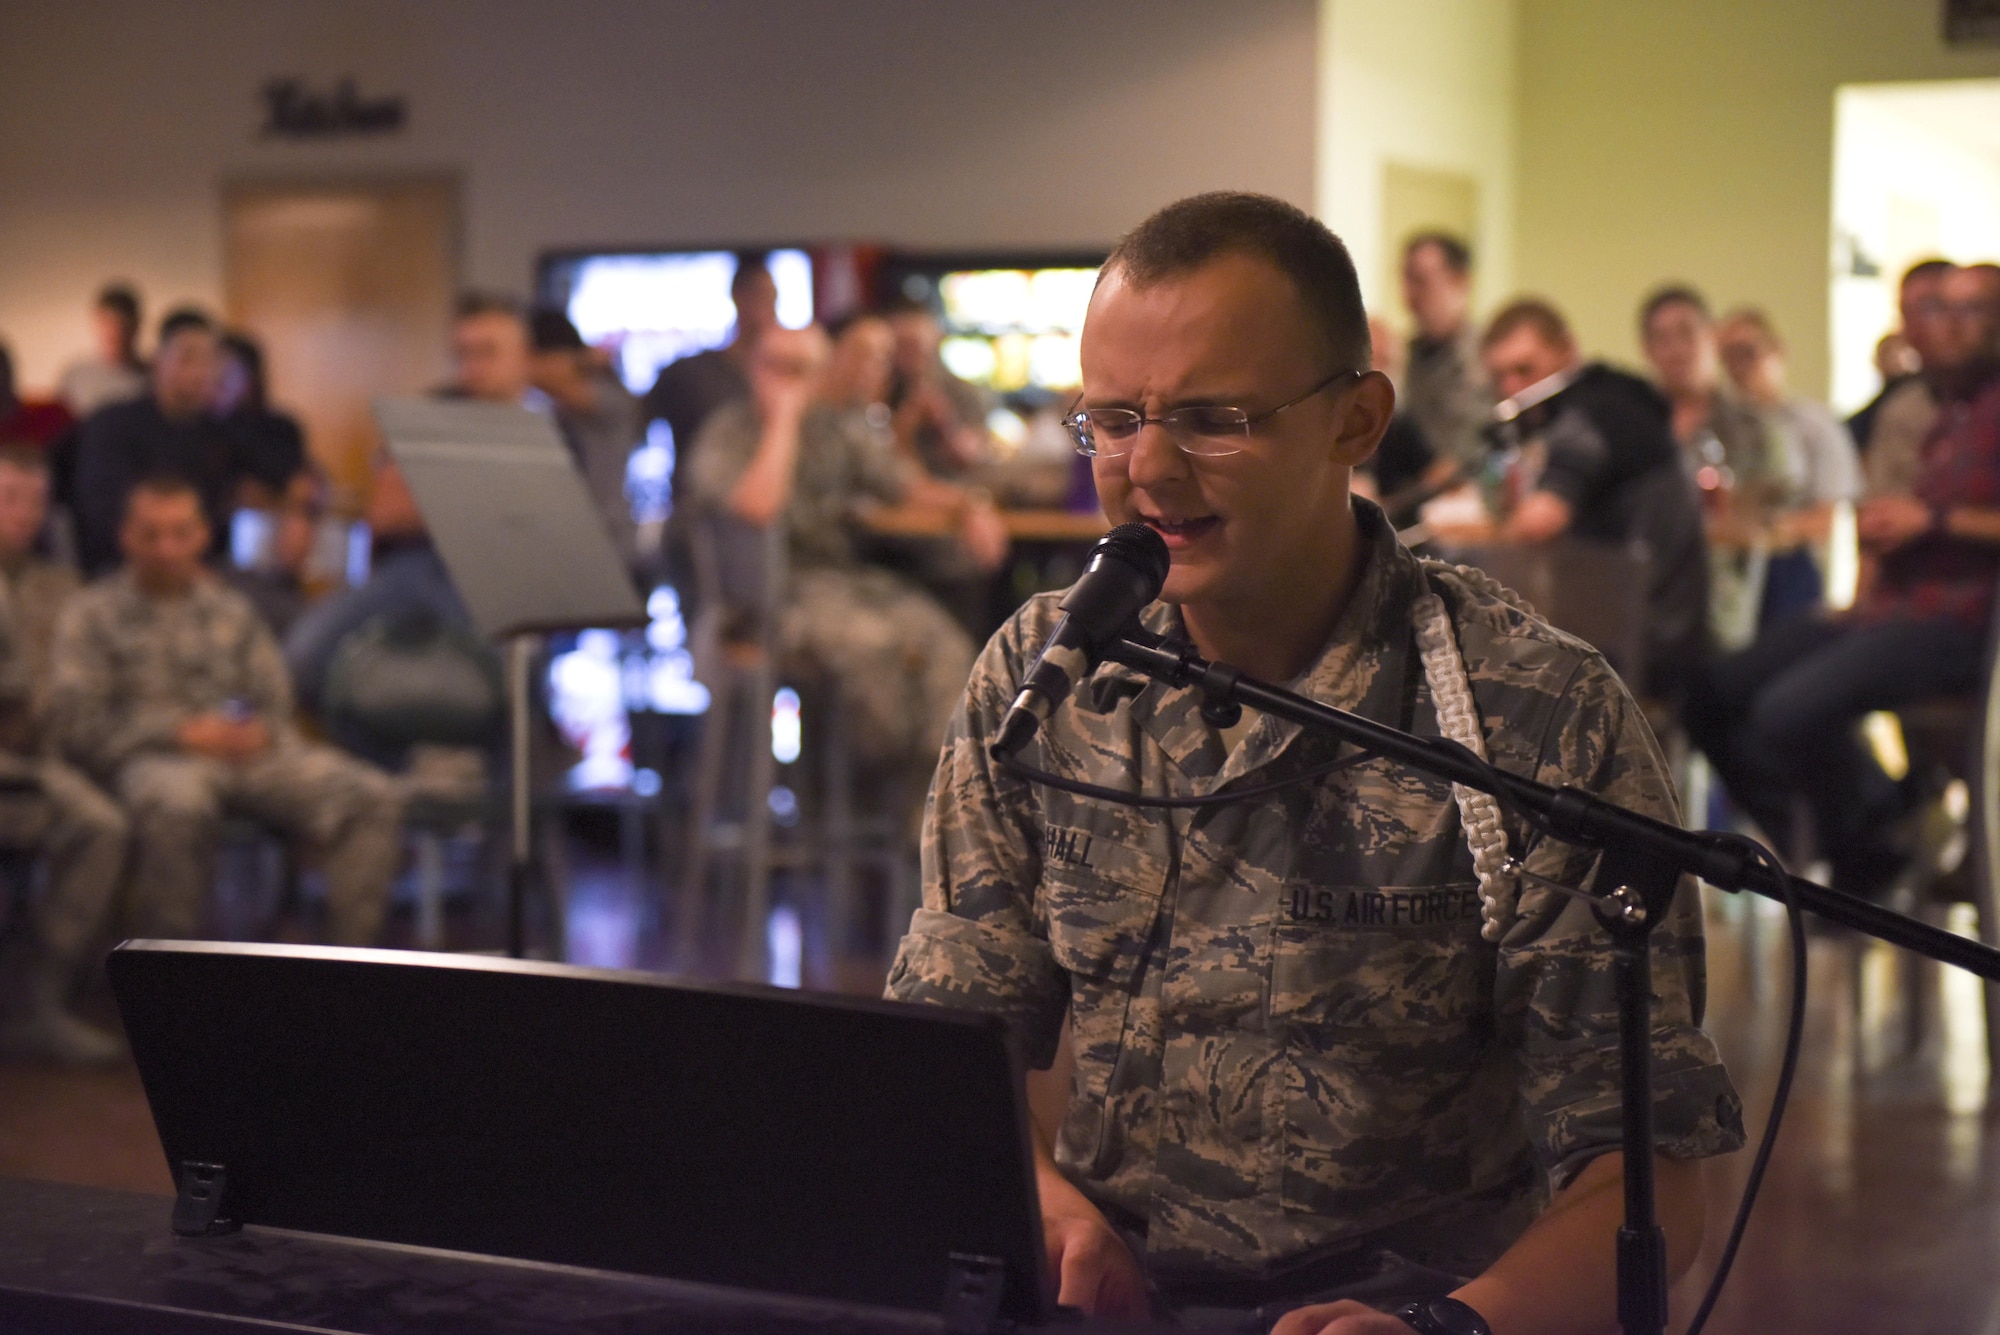 U.S. Air Force Airman Wyatt Hall, 316th Training Squadron student, sings while playing the piano at Crossroads Student Center on Goodfellow Air Force Base, Texas, Aug. 13, 2016. The performance was part of Goodfellow’s Got Talent, an event showcasing students’ different talents. (U.S. Air Force photo by Airman 1st Class Chase Sousa/Released)